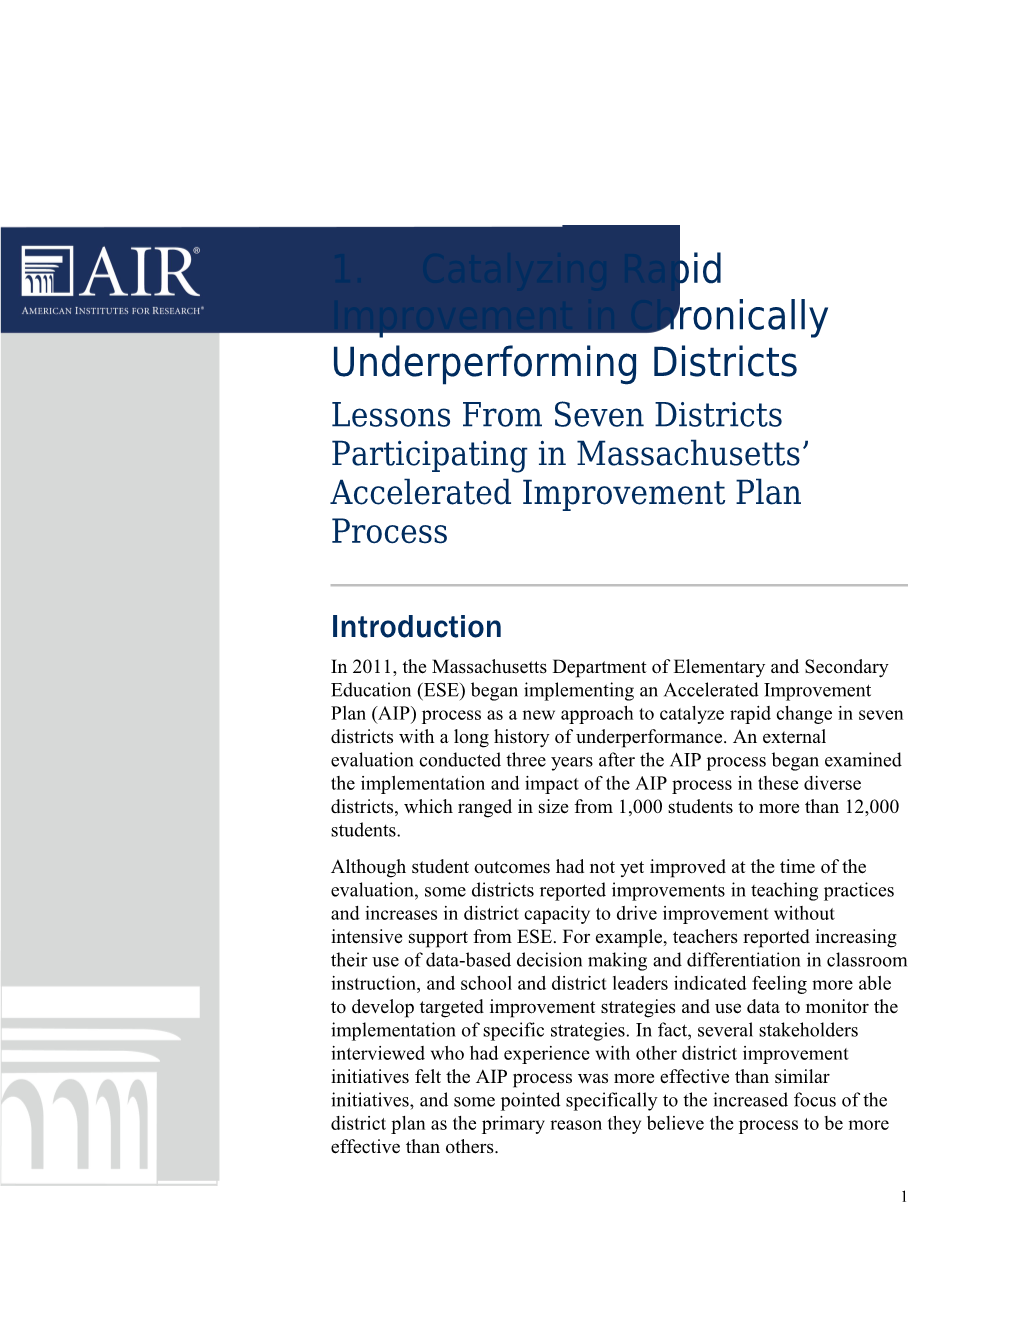 Accelerated Improvement Plan (AIP) Process Evaluation Brief (May 2015)